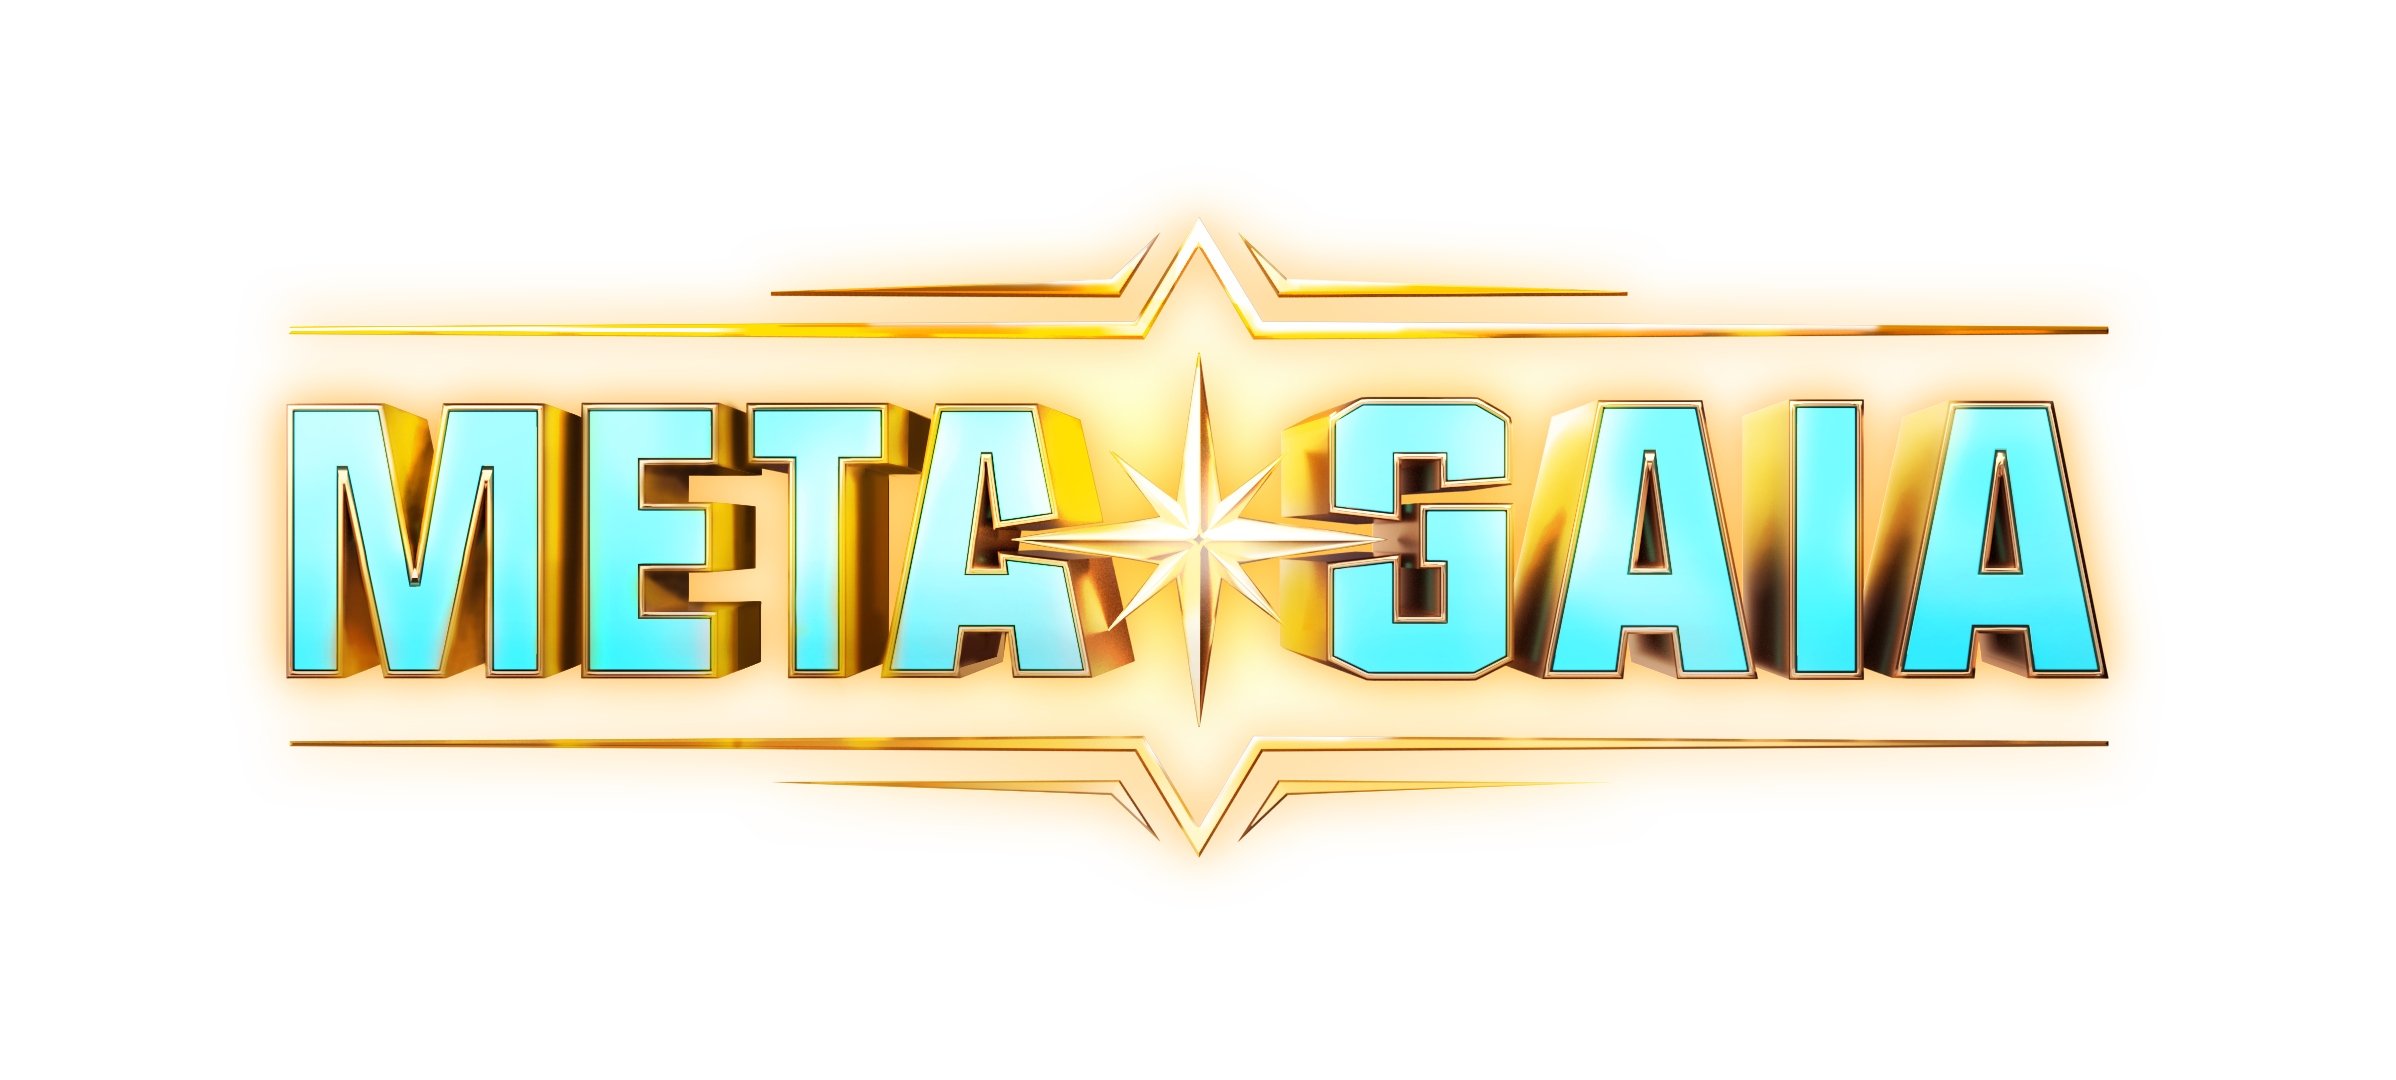 , MetaGaia Metaverse Announces Launch Party Featuring World’s First ChatGPT Oracle